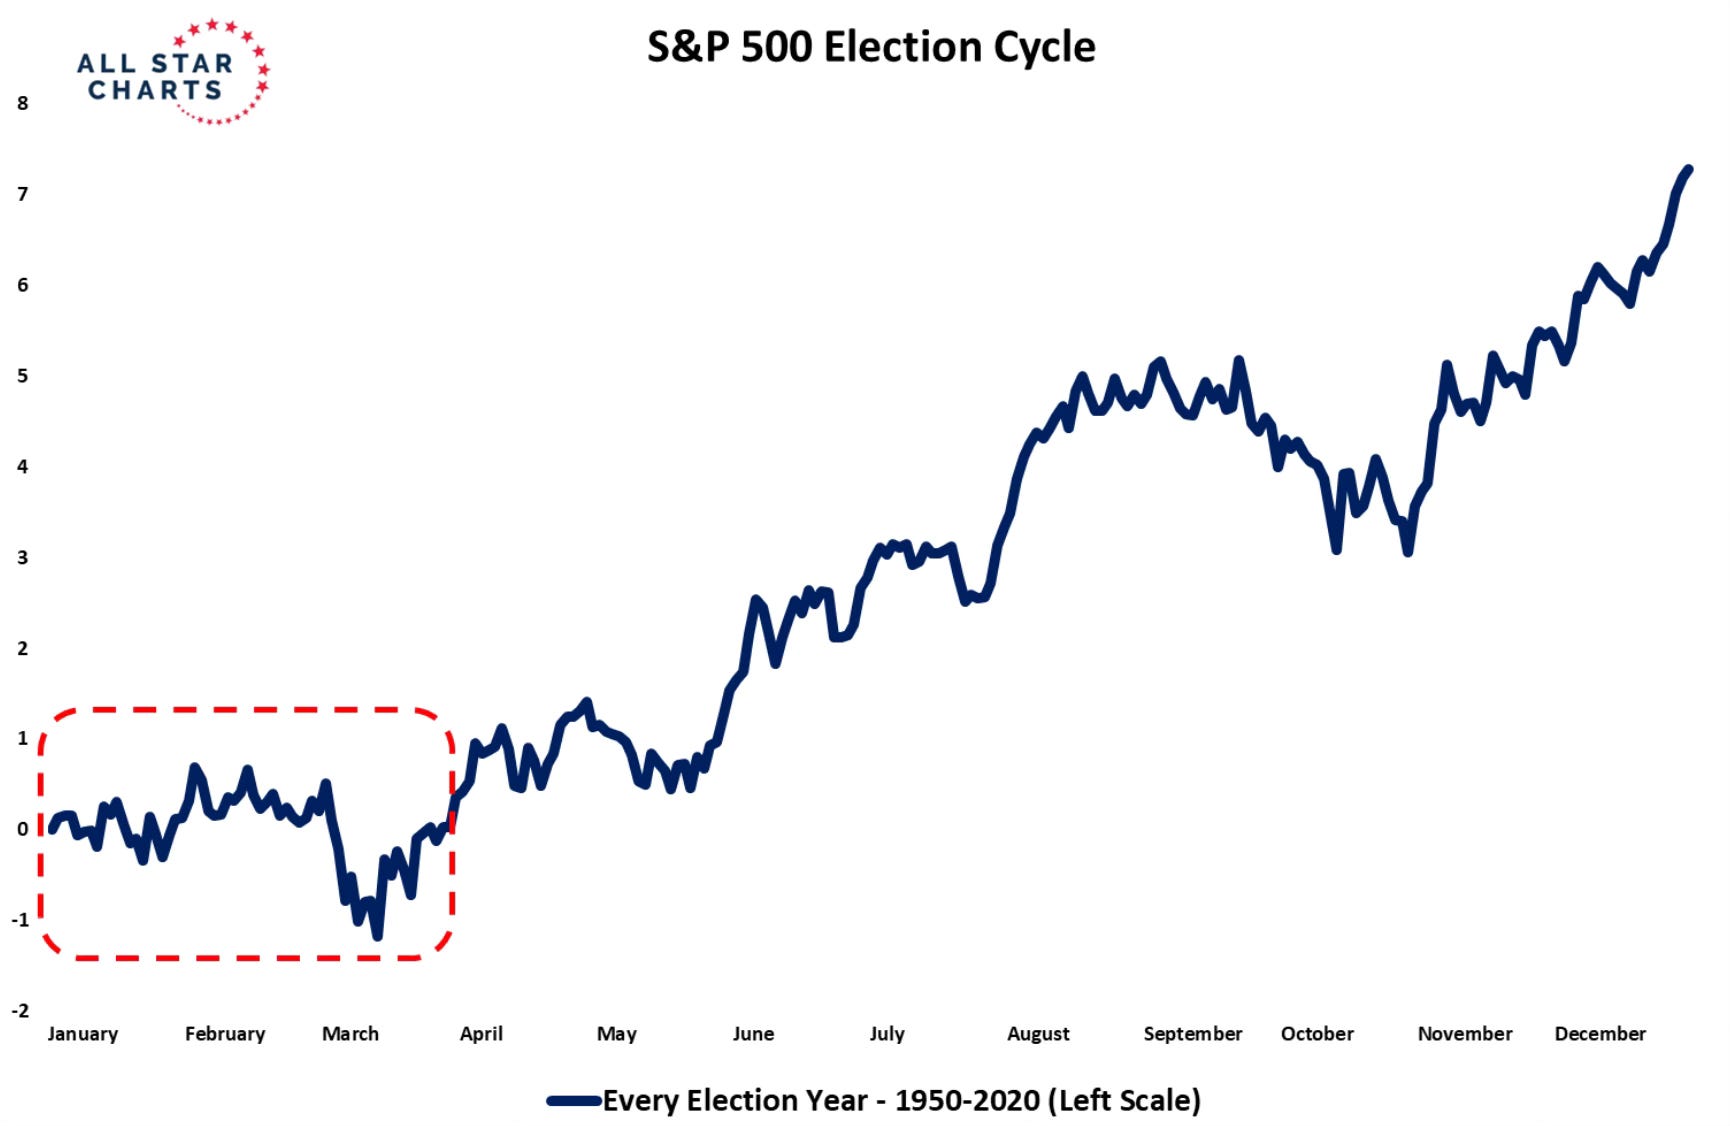 S&P 500 Election Cycle